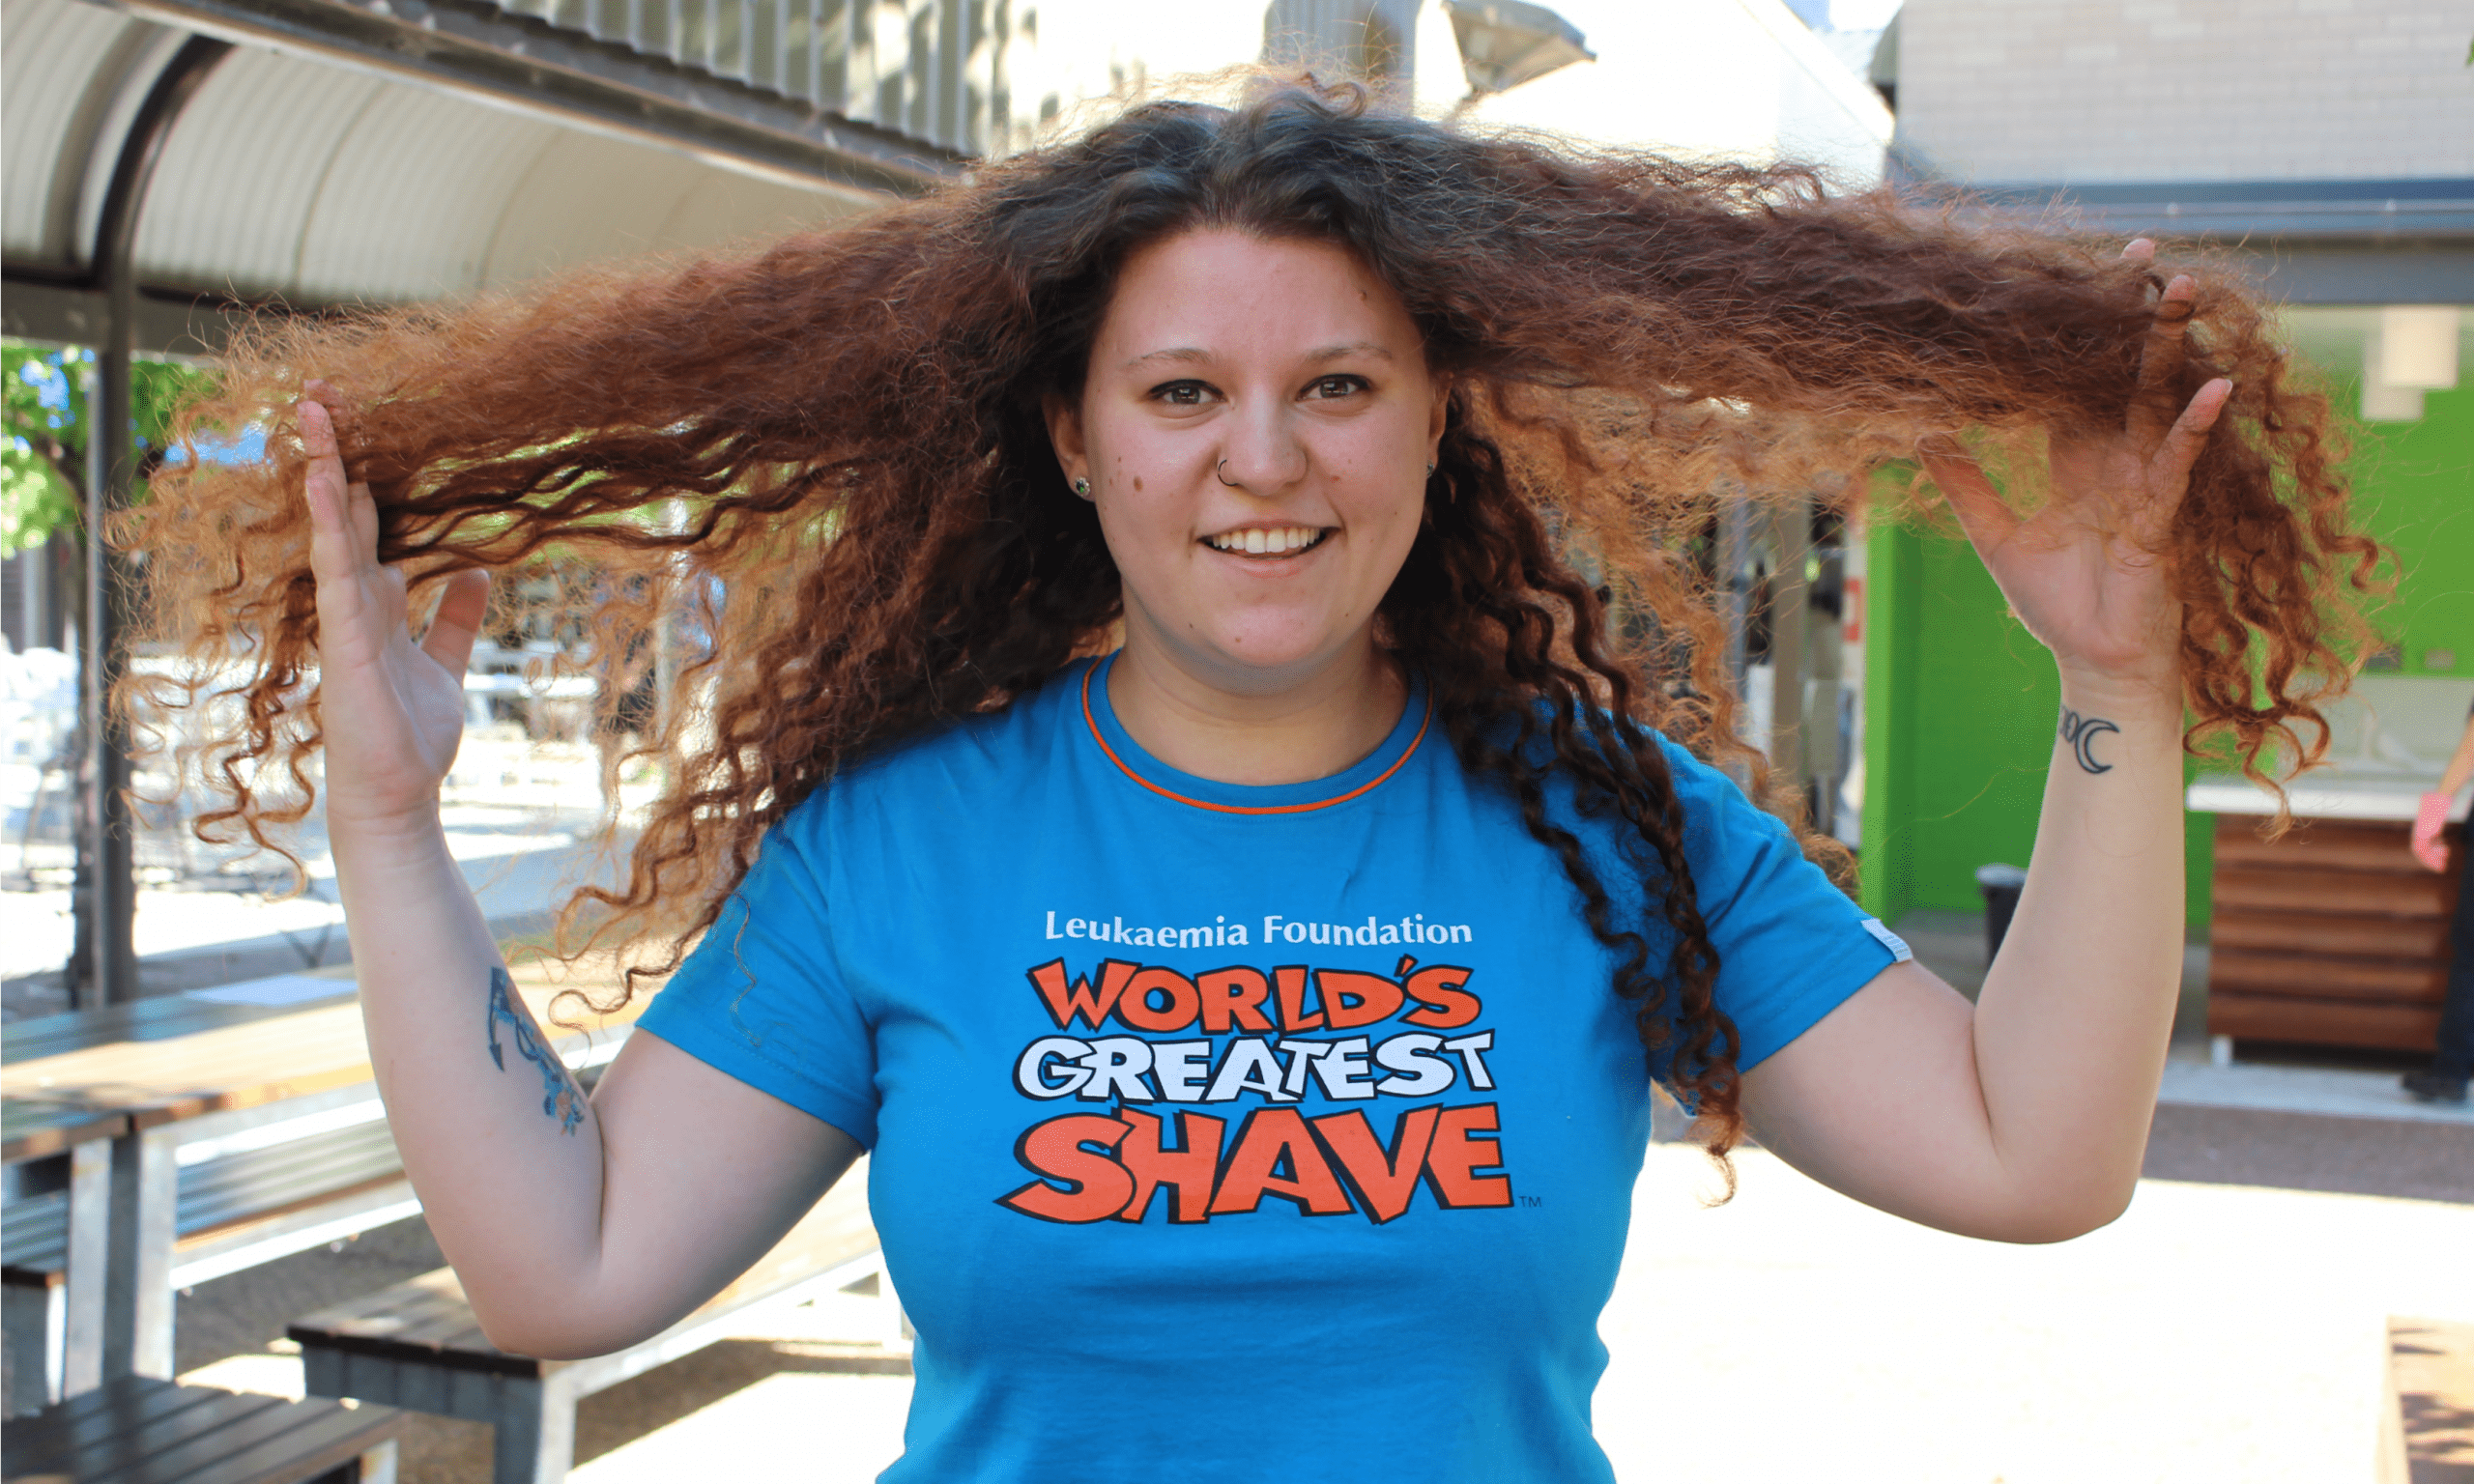 Worlds Greatest Shave participant Rachel Hindi